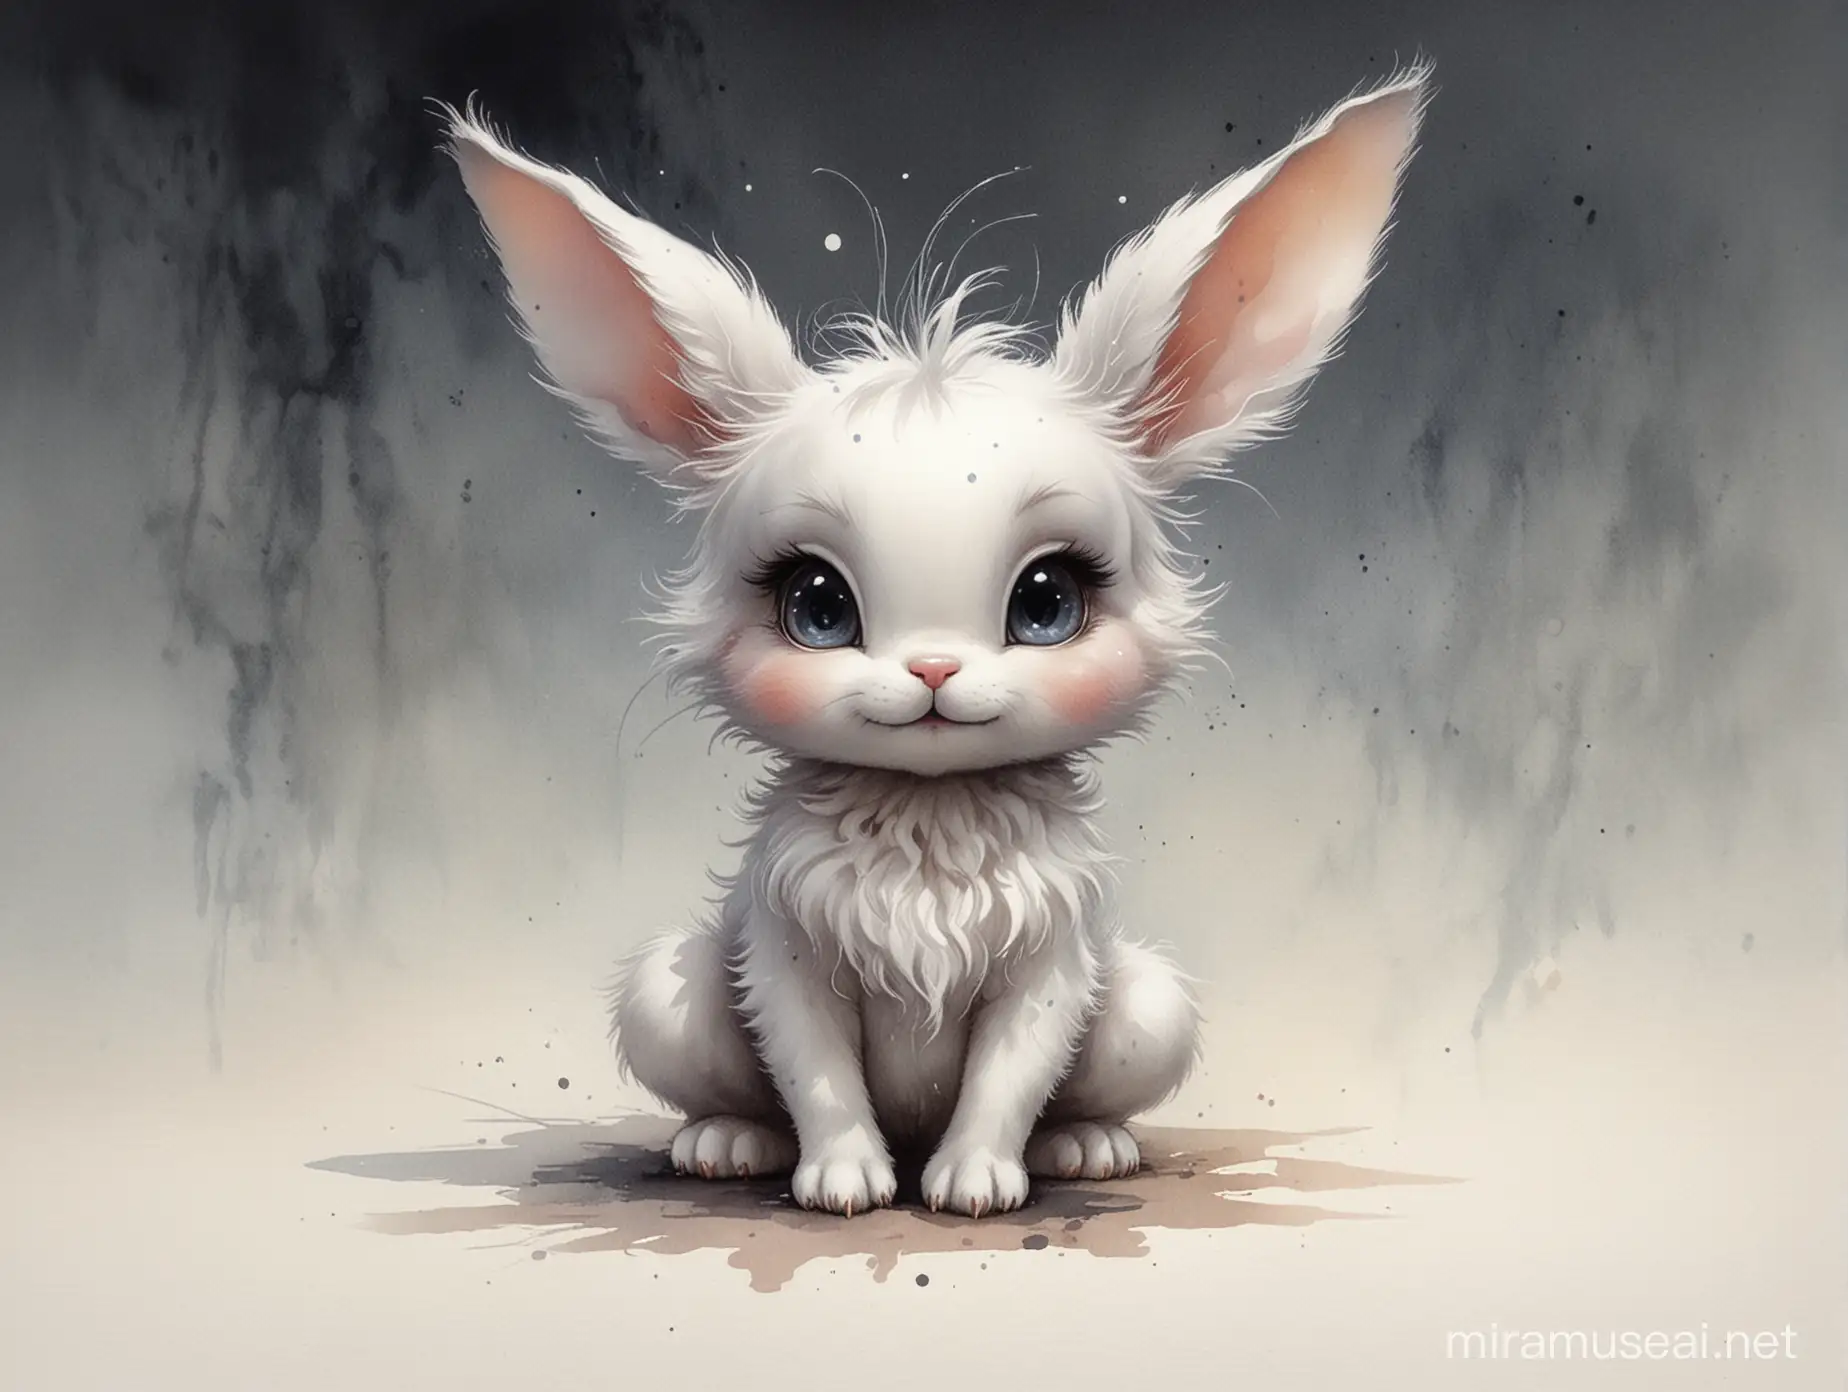 Fantasy Chibi Bunny in Stephen Gammell Style Watercolor Drawing